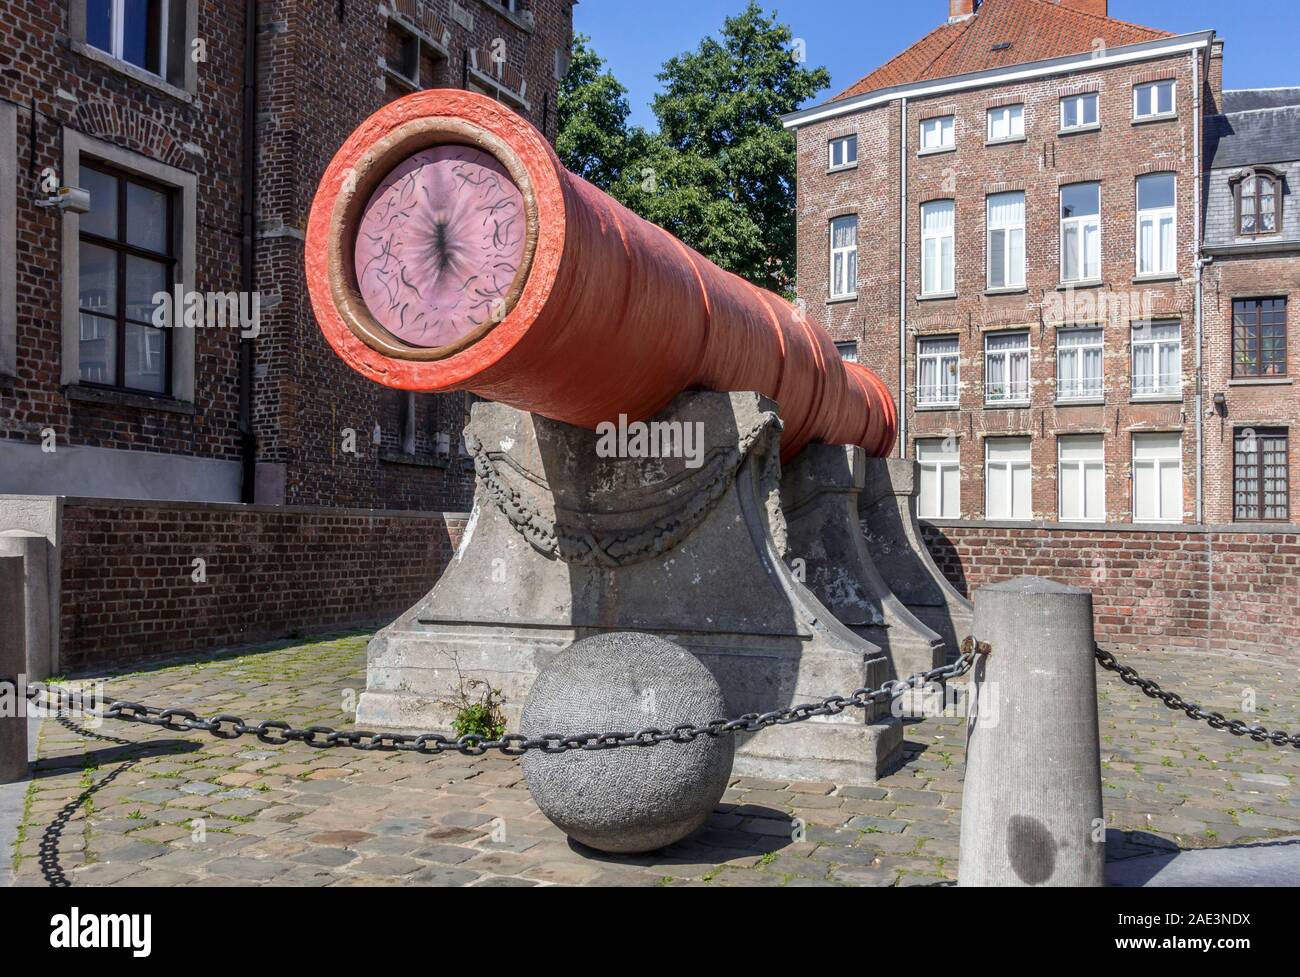 The medieval red cannon Dulle Griet / Mad Meg, 15th century wrought-iron bombard, large-calibre gun in the city Ghent / Gent, East Flanders, Belgium Stock Photo